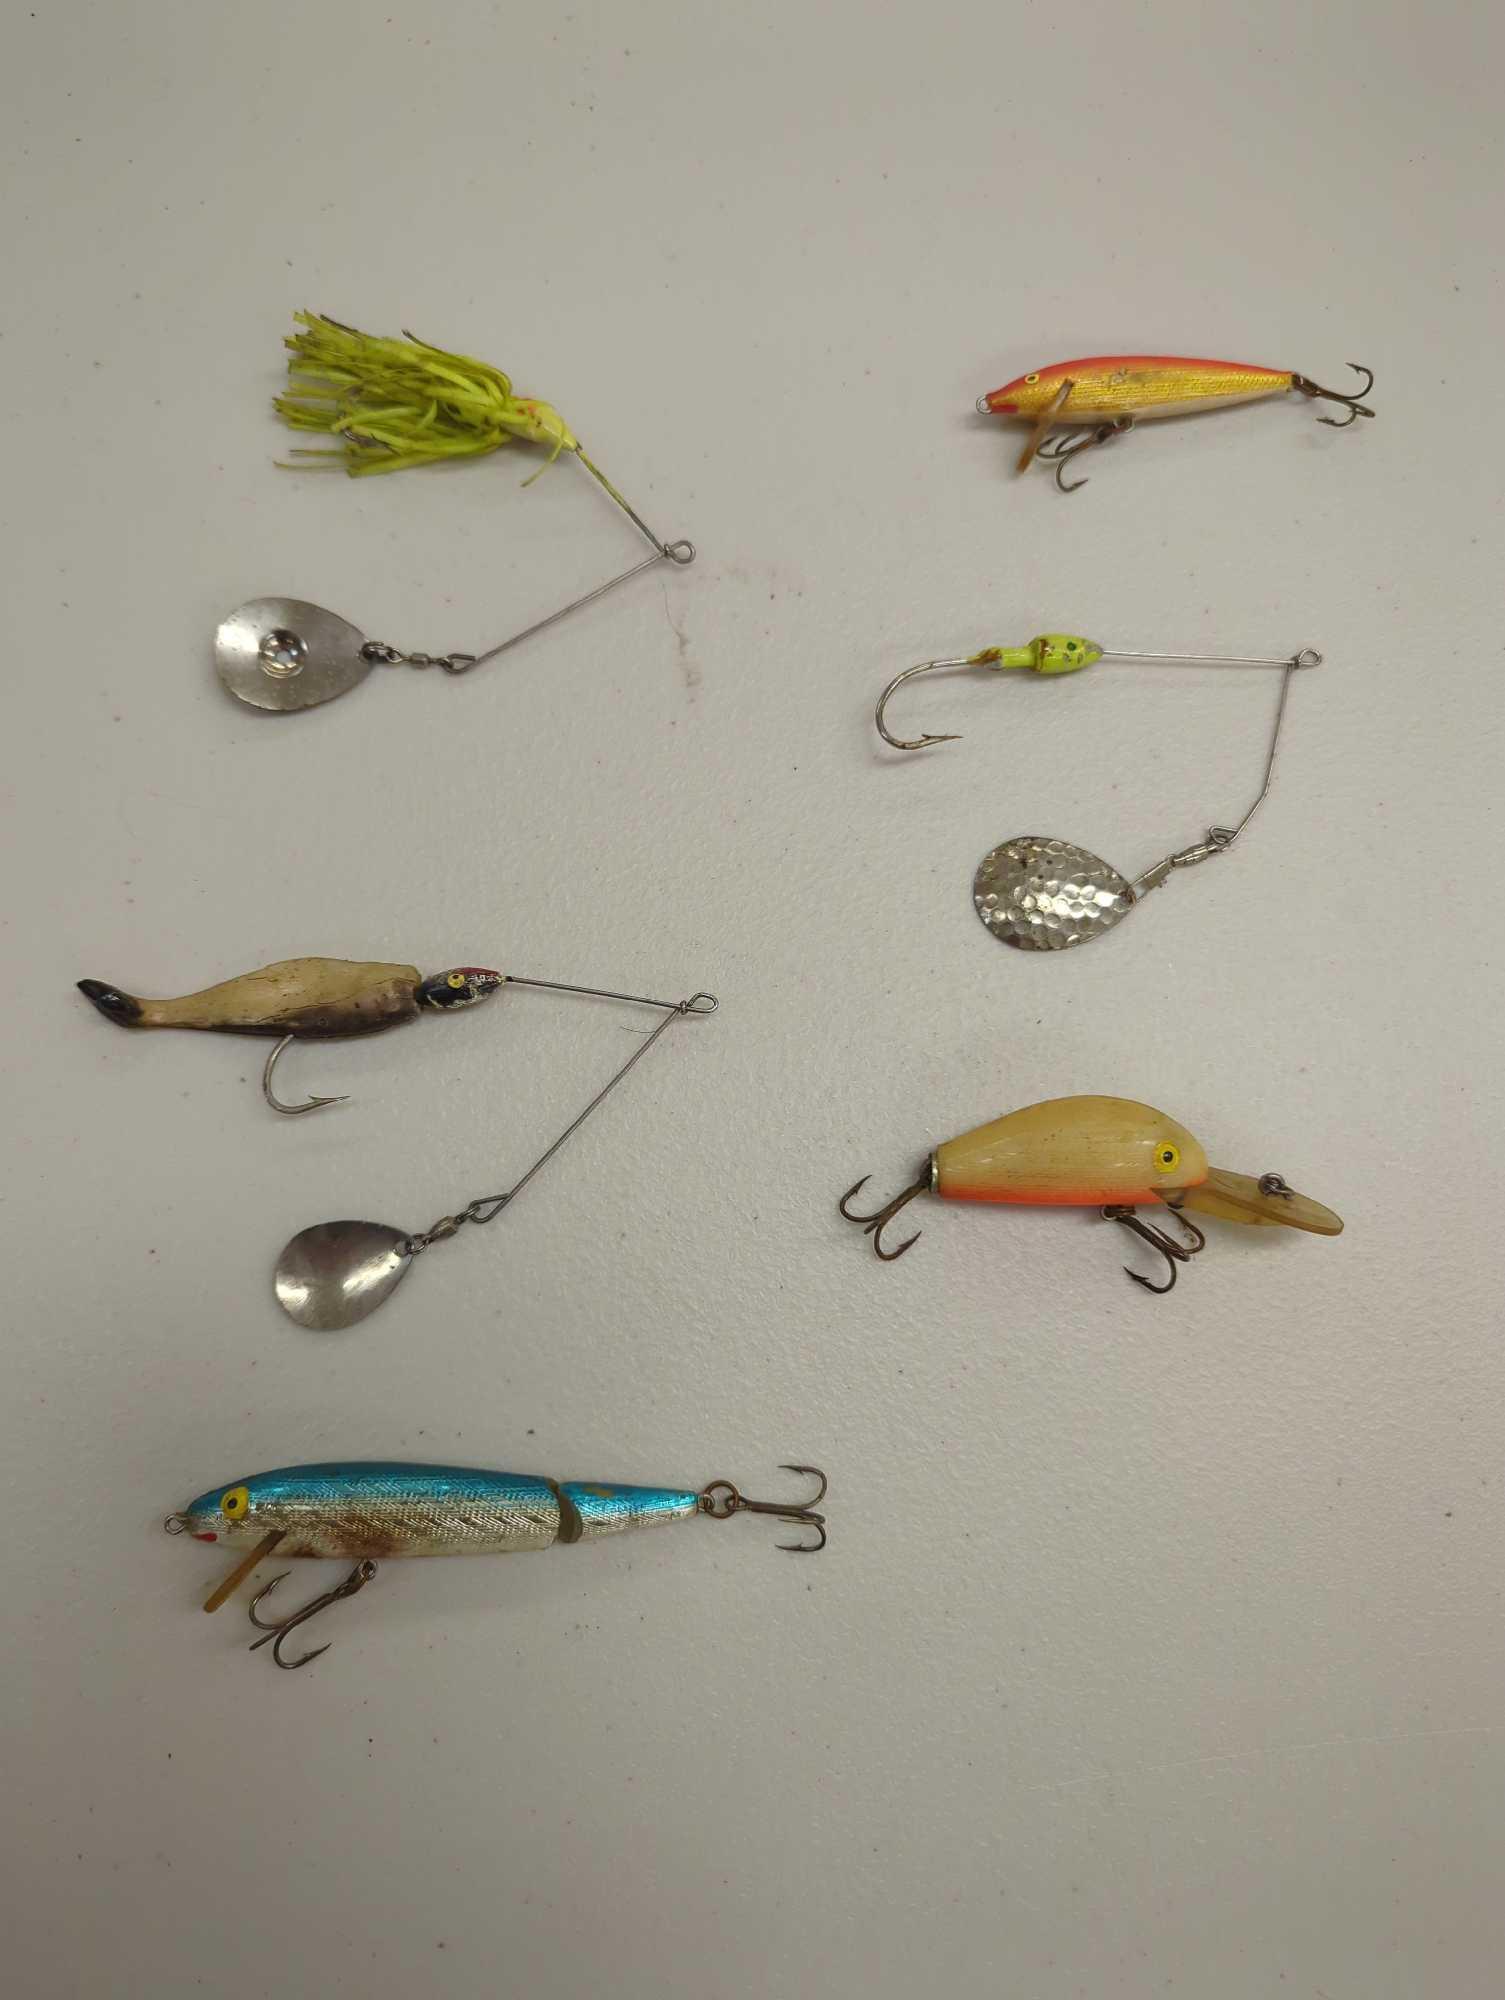 Tackle Box/Display and contents including various fishing lures as pictured. Comes as is shown in